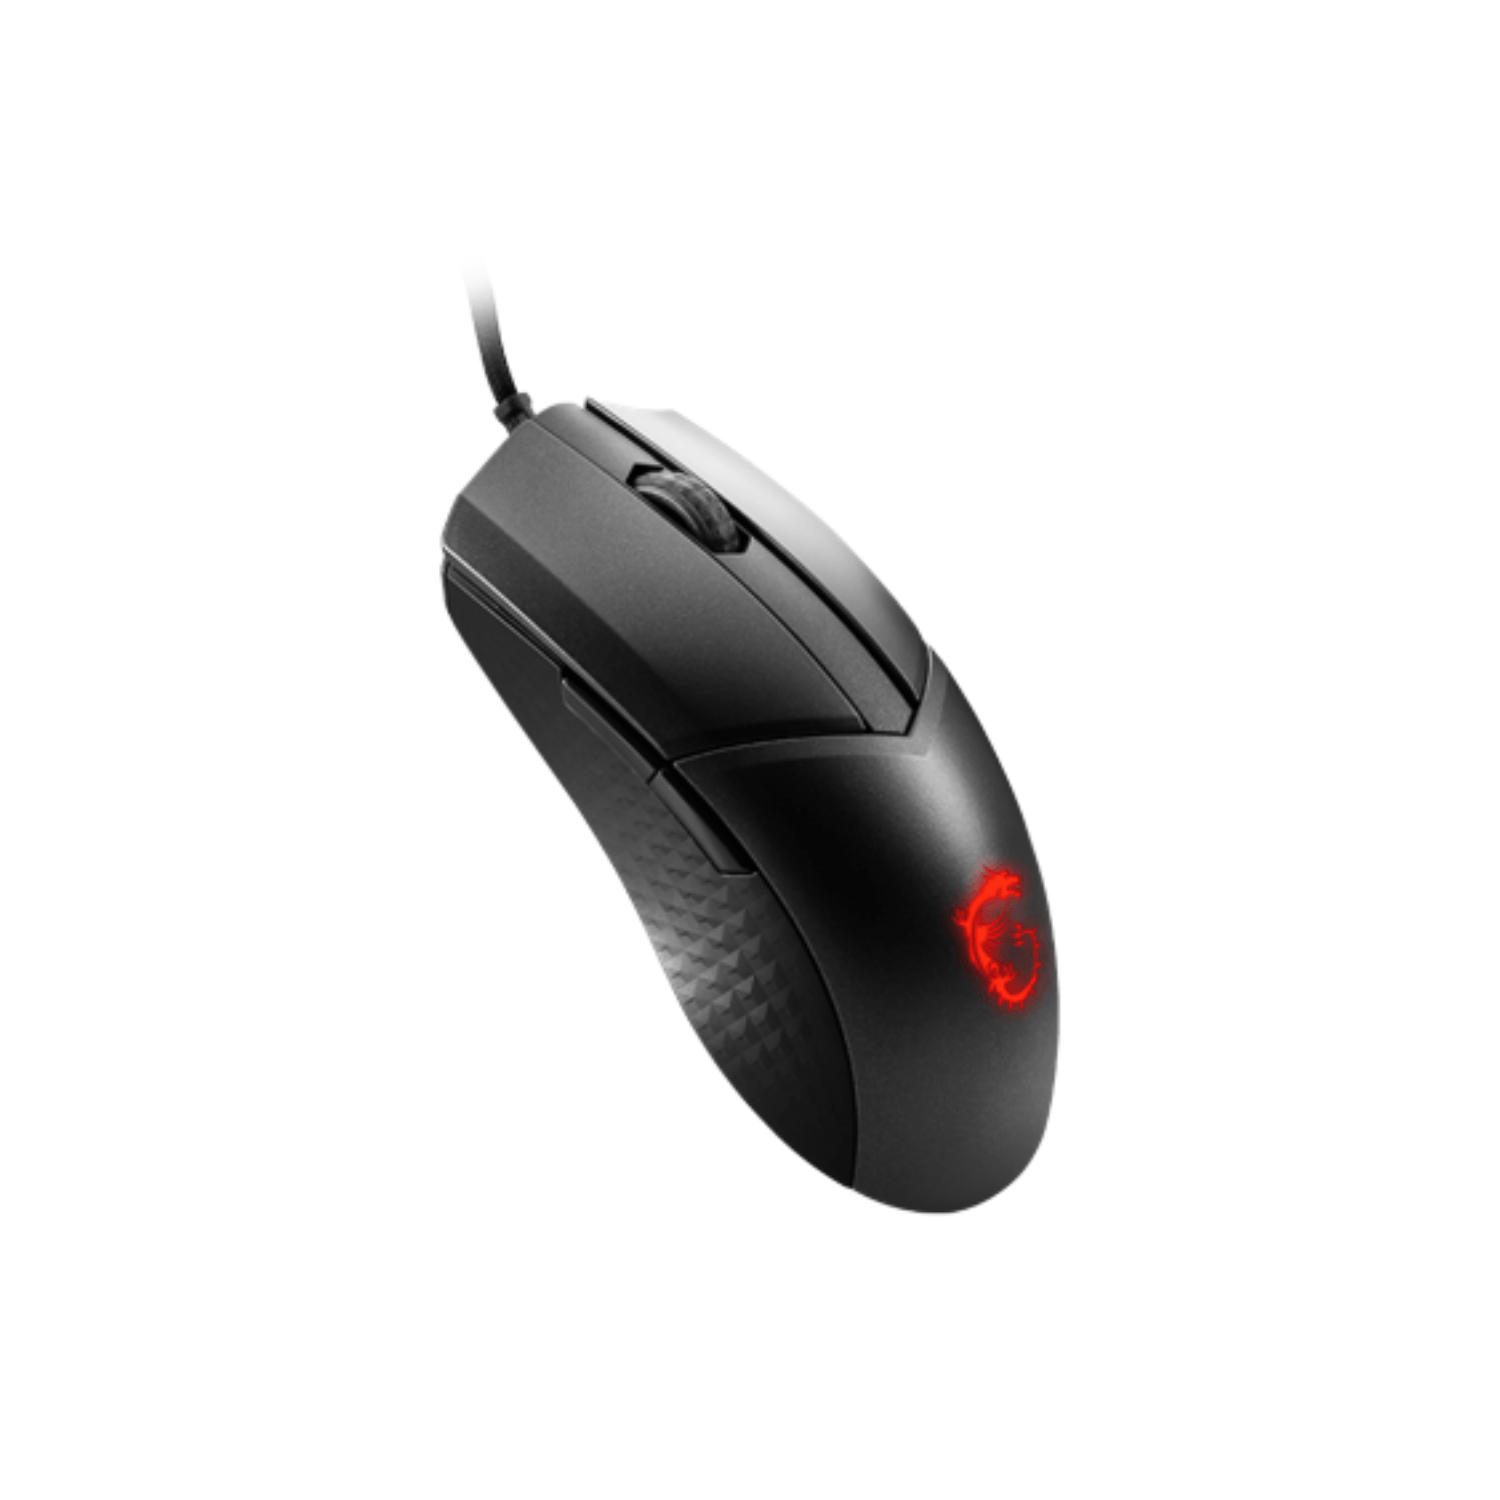 Msi Clutch Gm41 Lightweight Mouse Optico Gaming Rgb, Usb, Color Negro